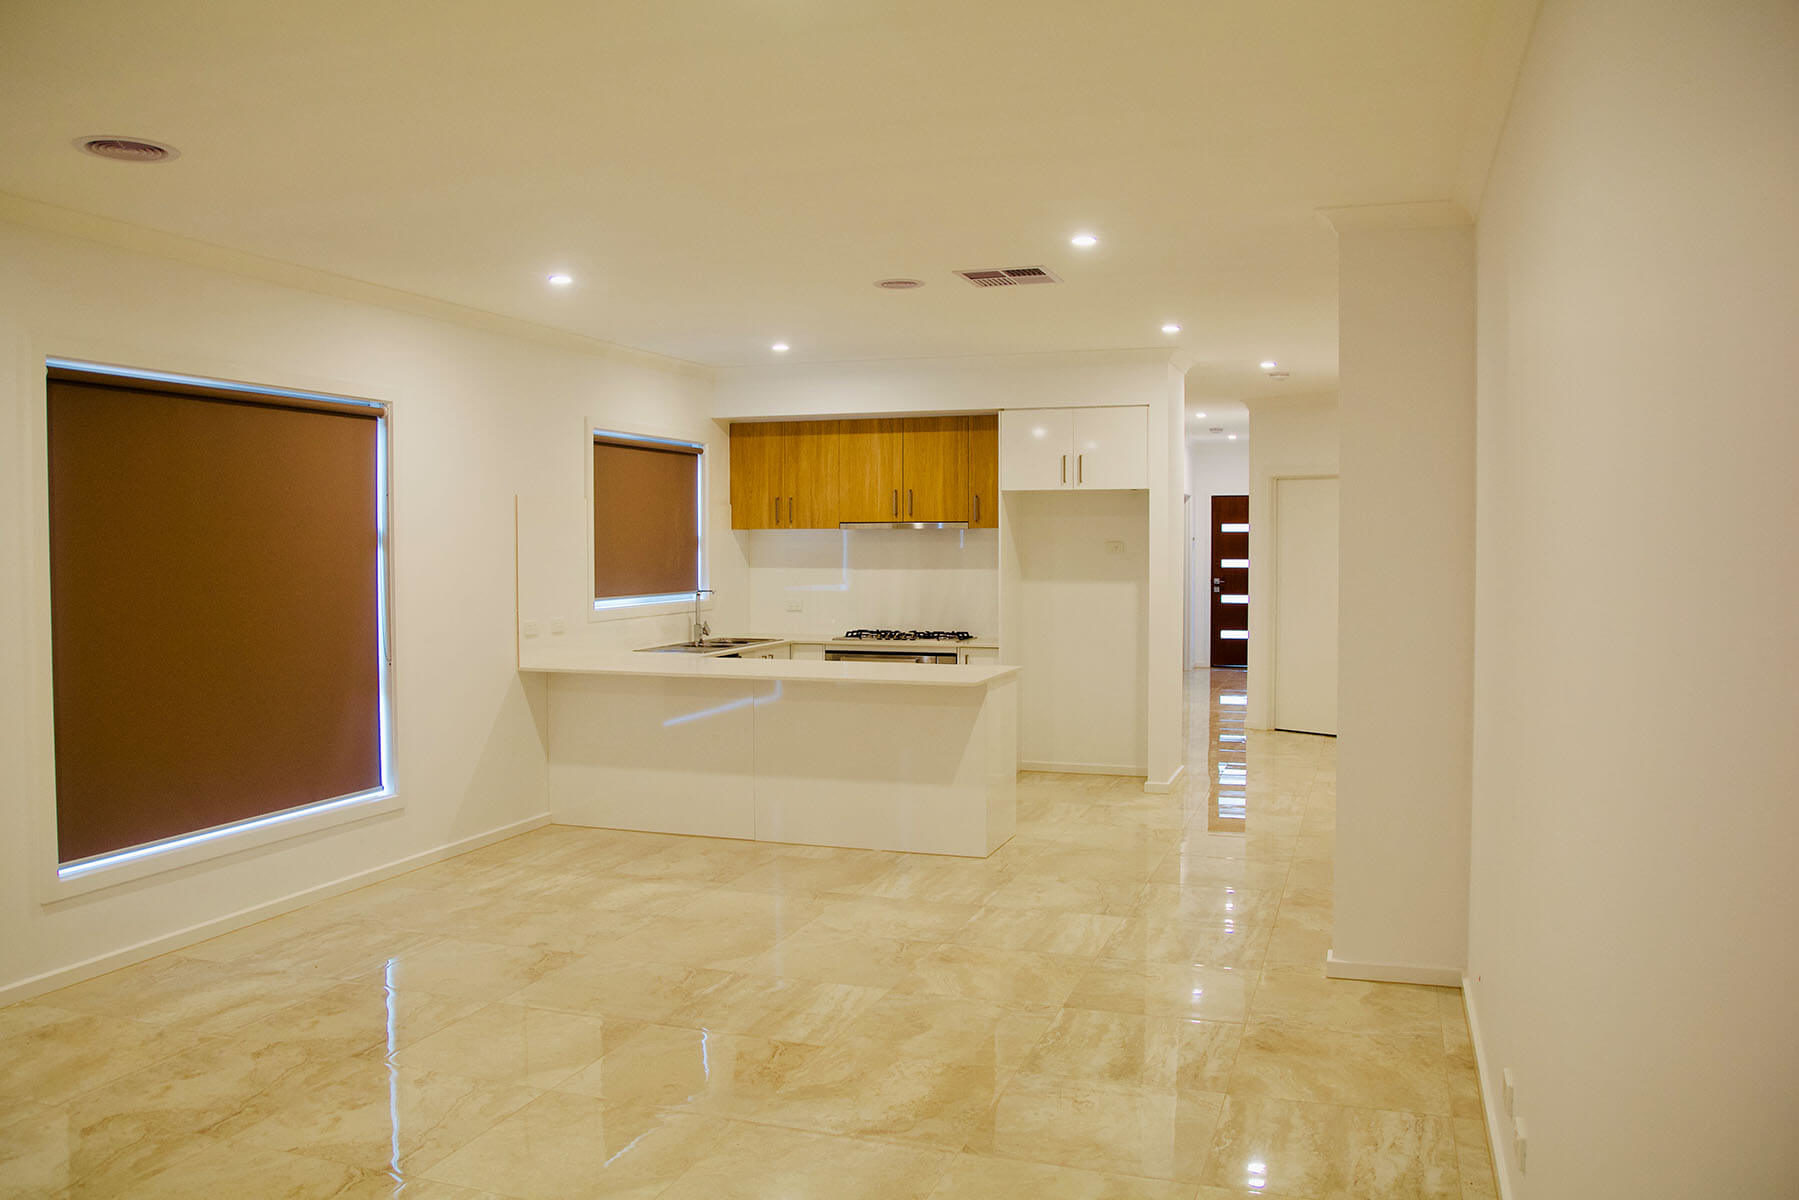 Luxurious Kitchen and Cabinets